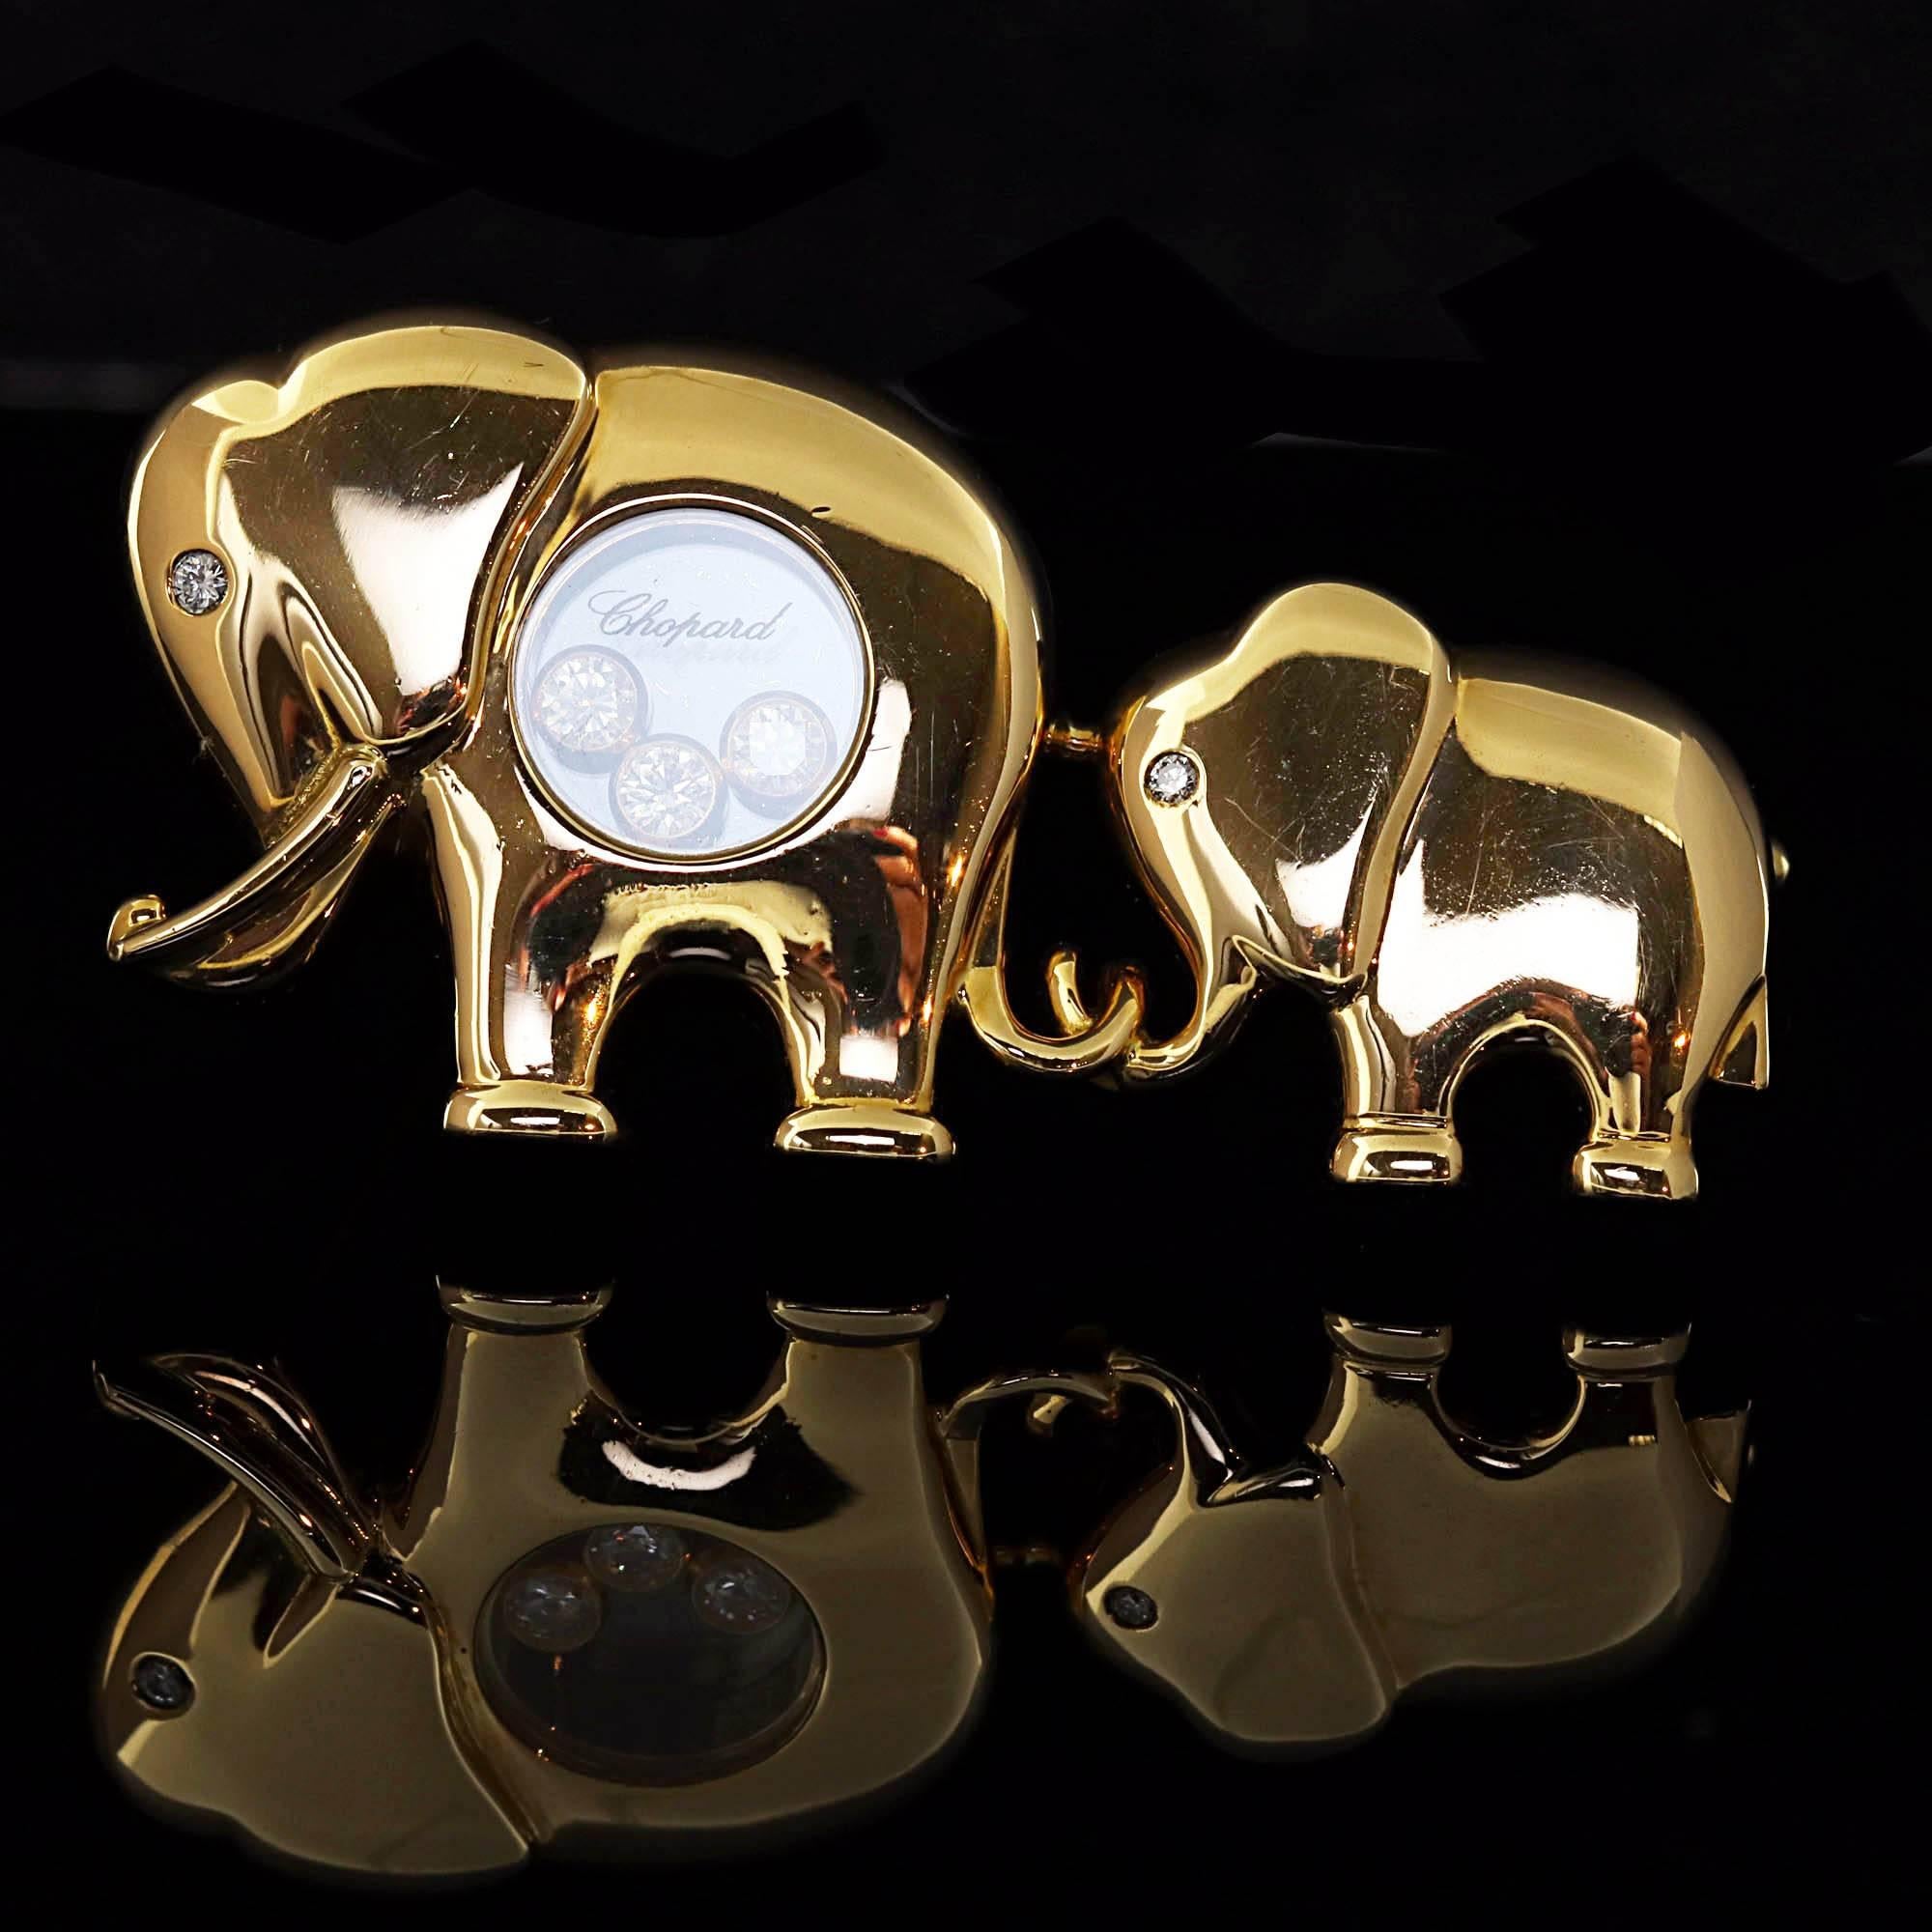 This Chopard piece is finely crafted from solid 18k yellow gold. It features two adorable elephants designed with sparkling floating diamonds. Both the leading elephant and the baby elephant are adorned with a single diamond as an eye. 

Material: